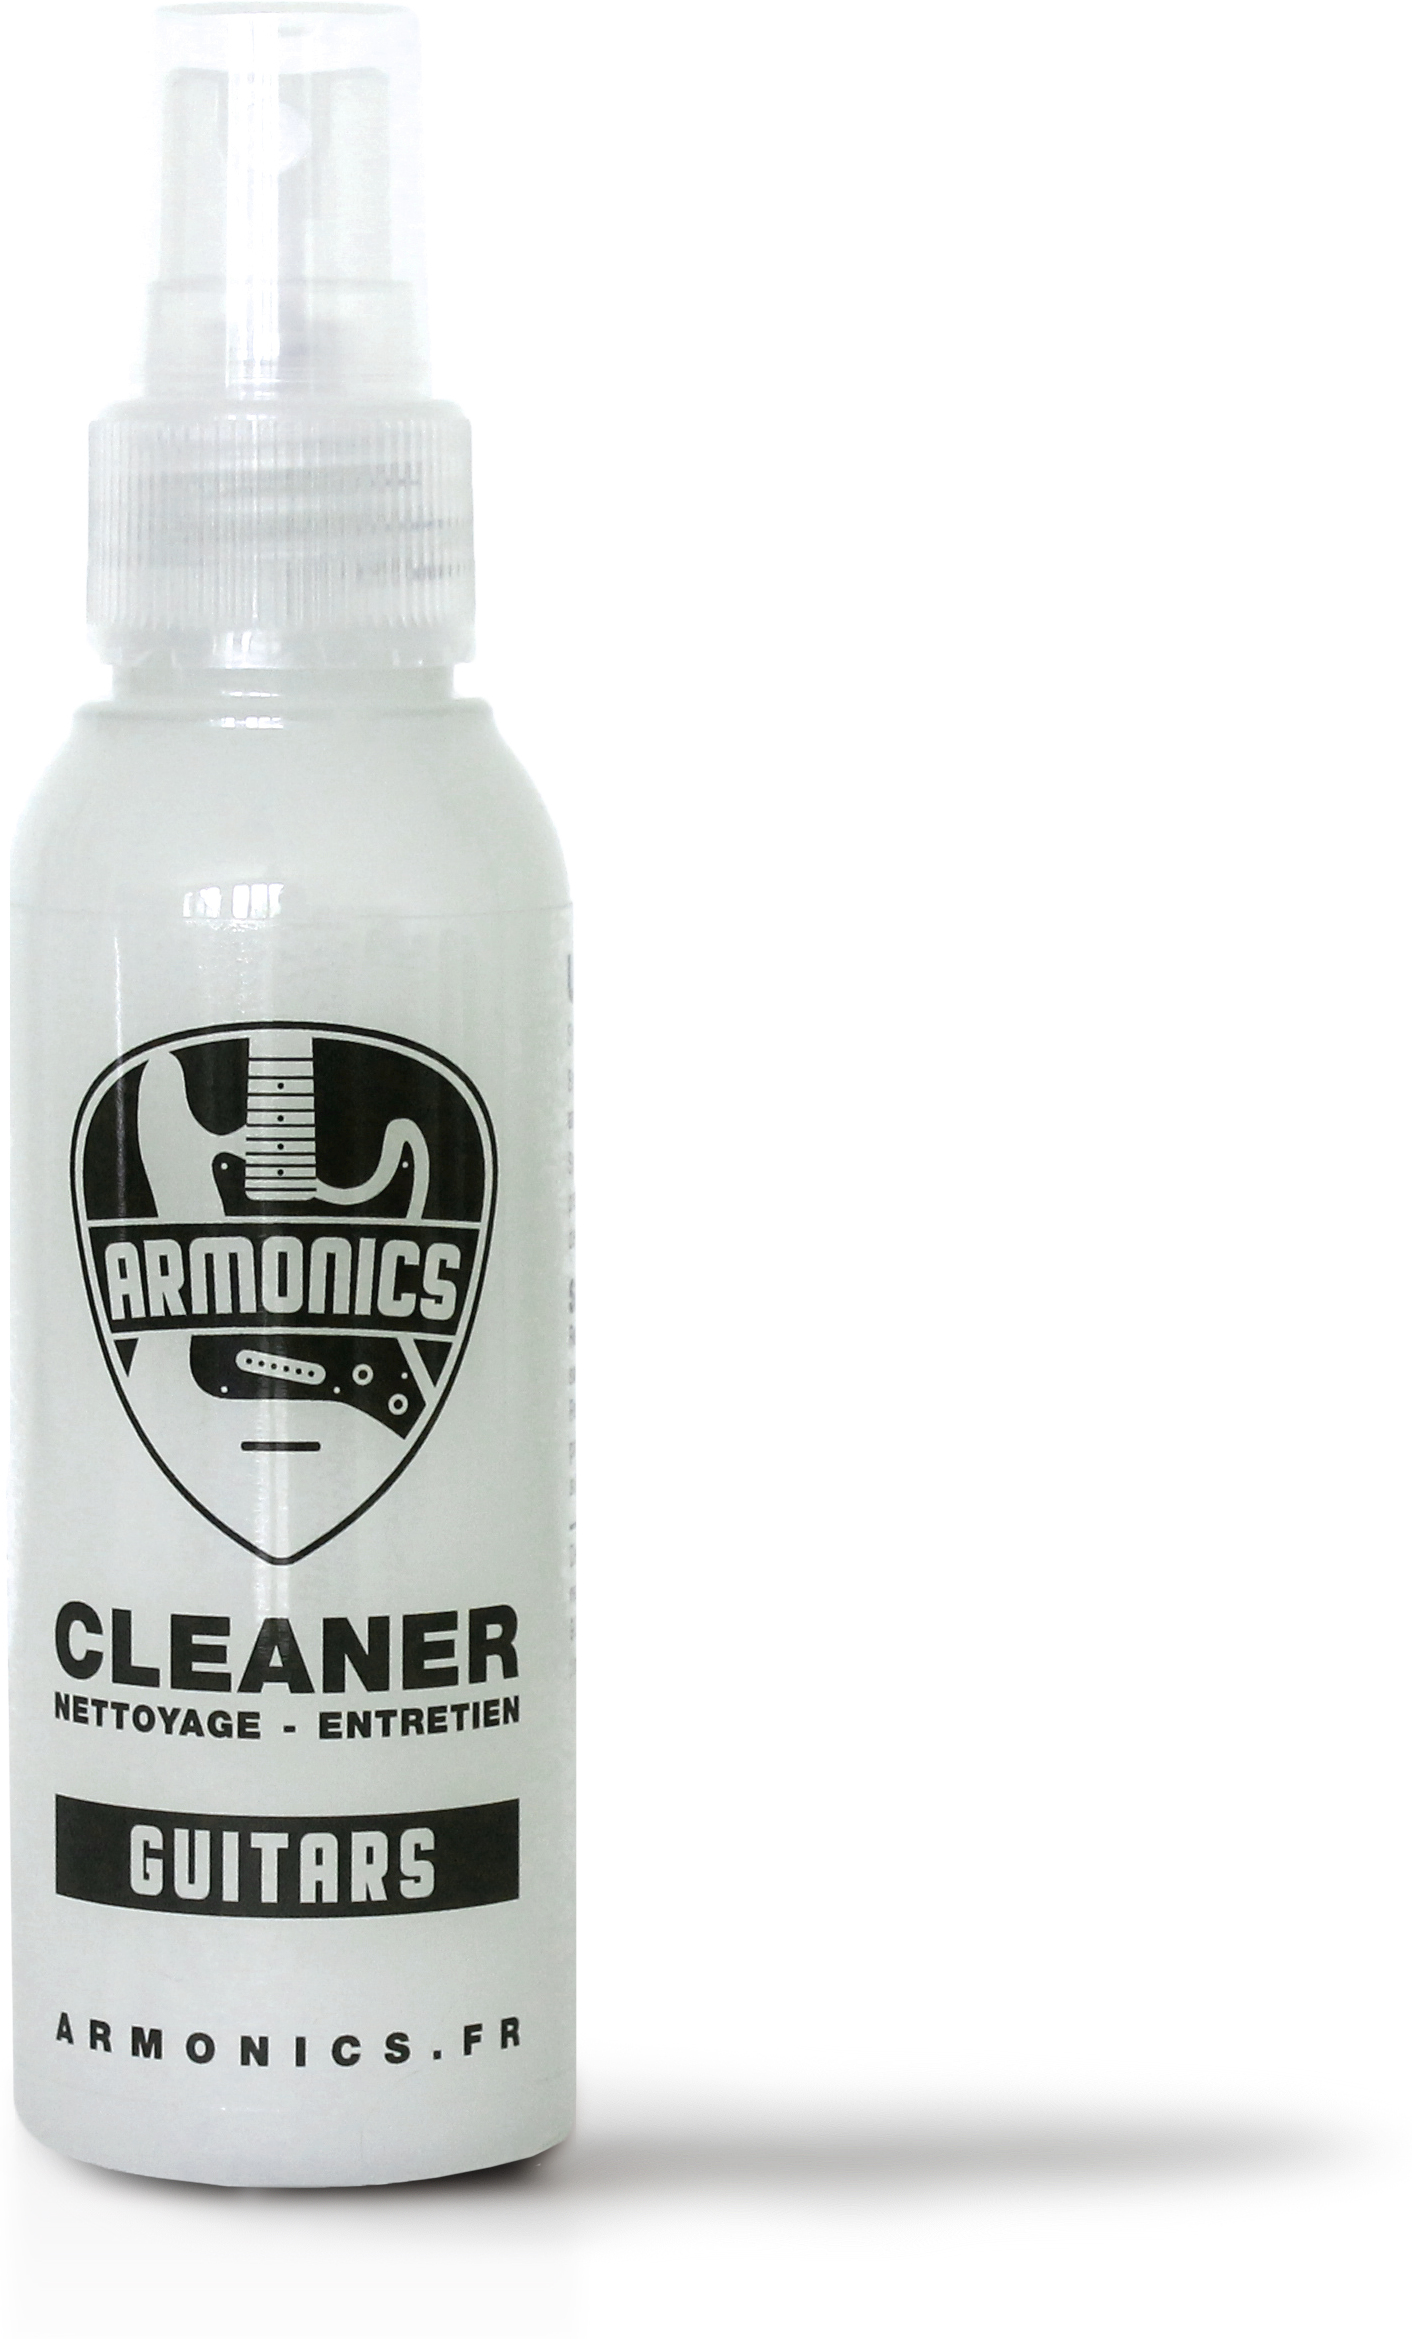 Armonics Cleaner - Care & Cleaning Guitarra - Main picture